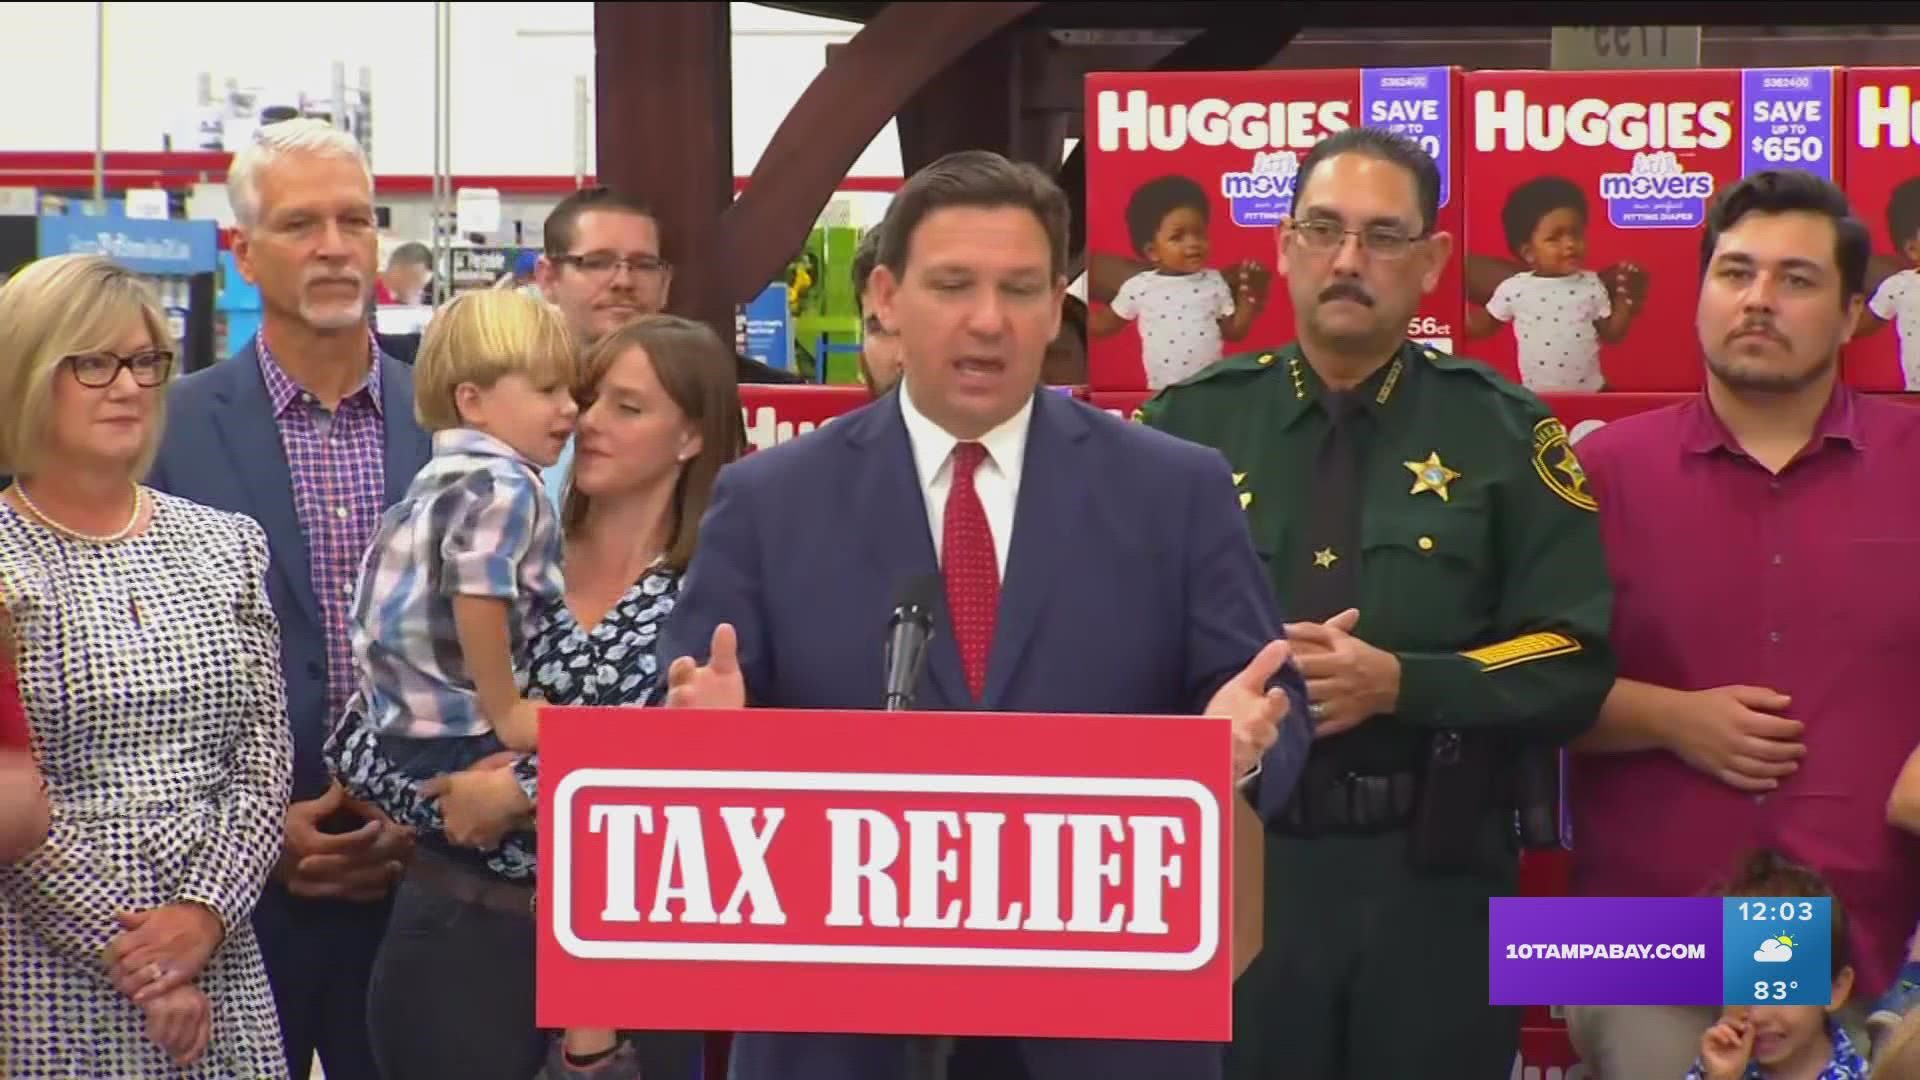 The governor called the bill "the largest tax relief in the history of the state of Florida."